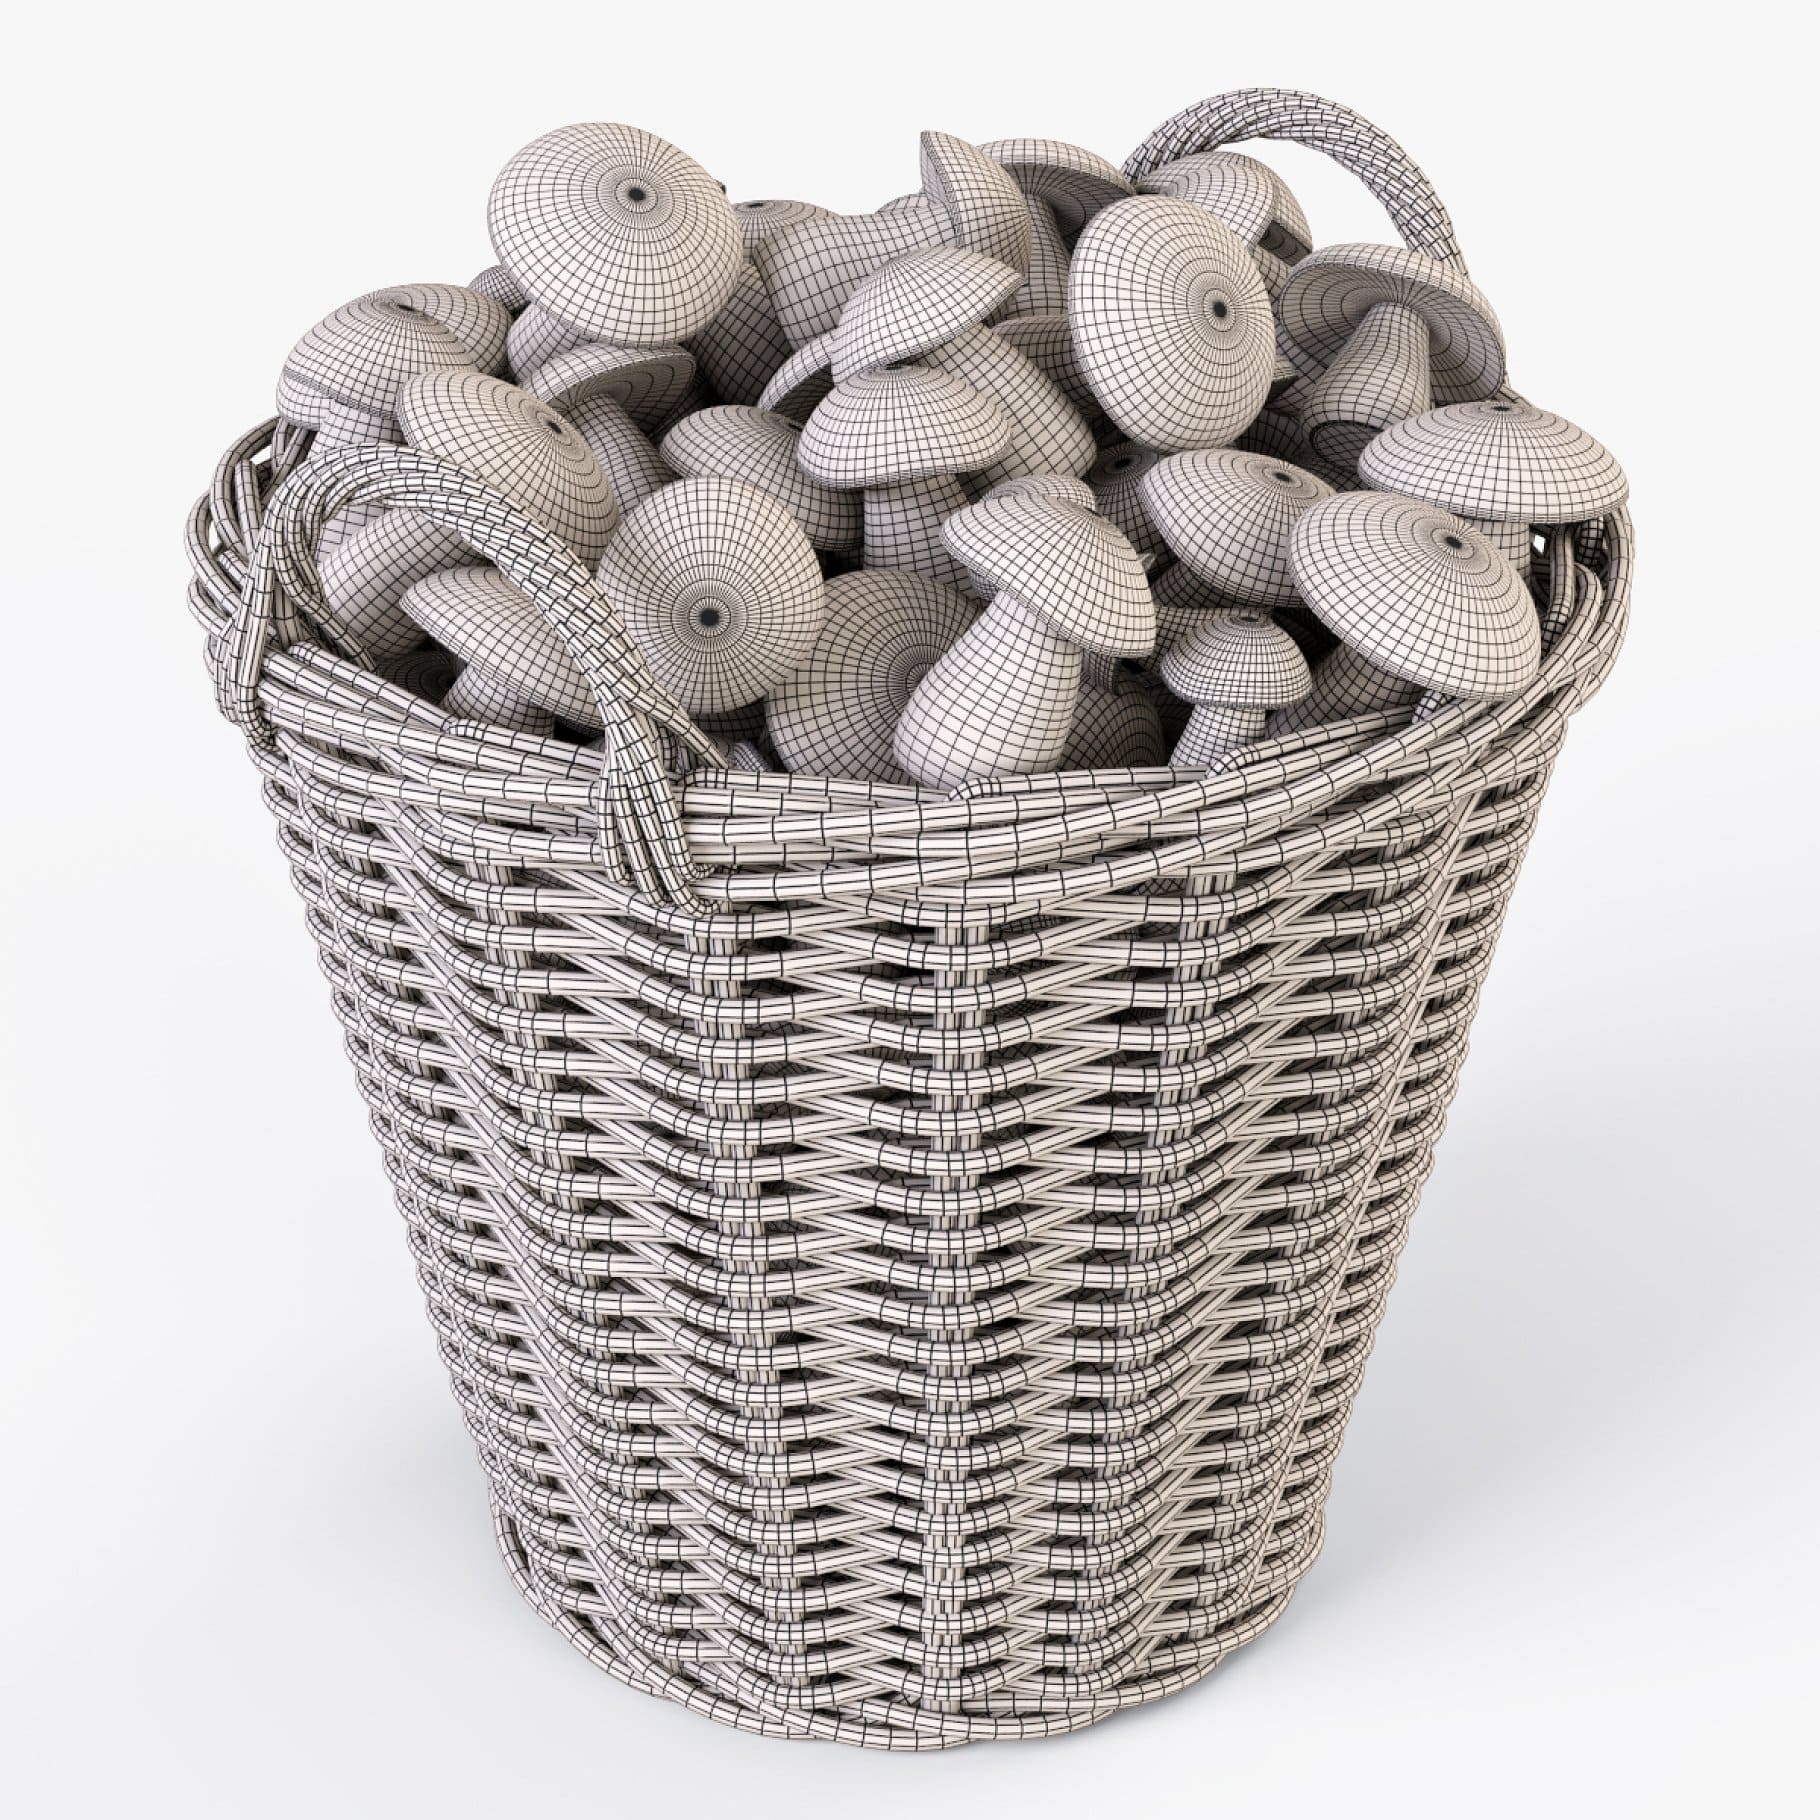 A gray 3D model of a basket with mushrooms is depicted on a white background.